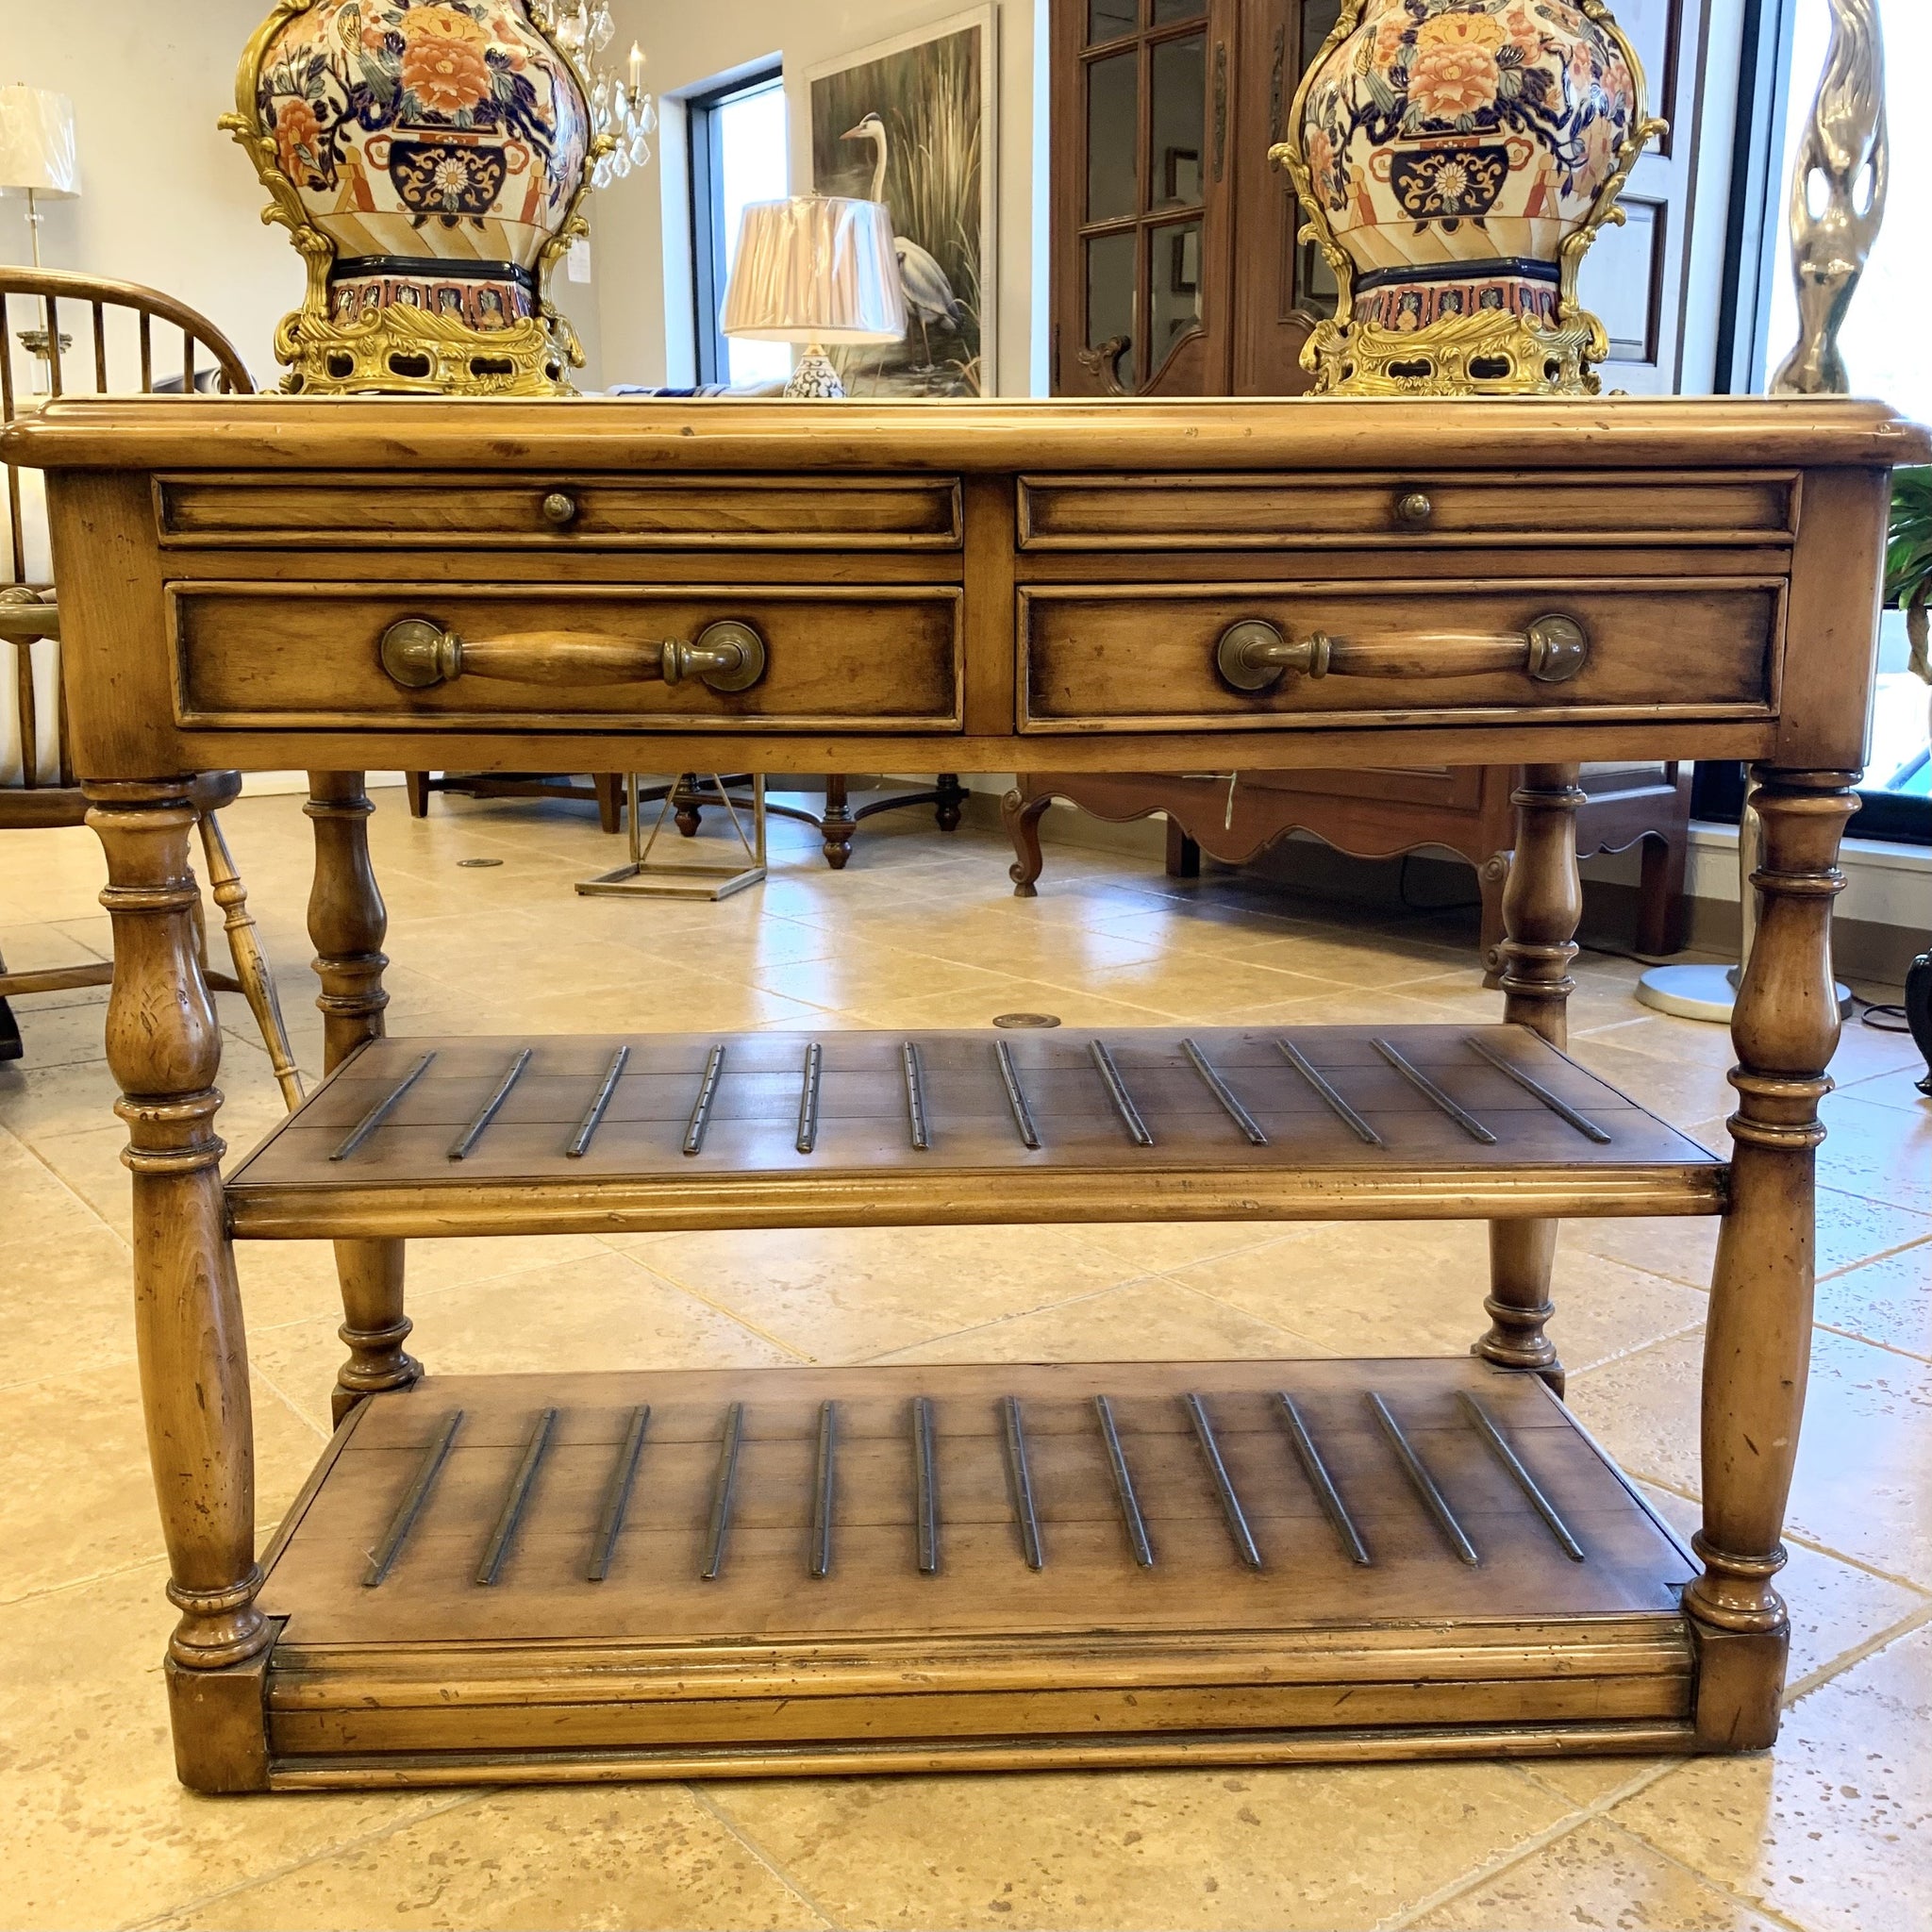 Wood Cart with Marble Top